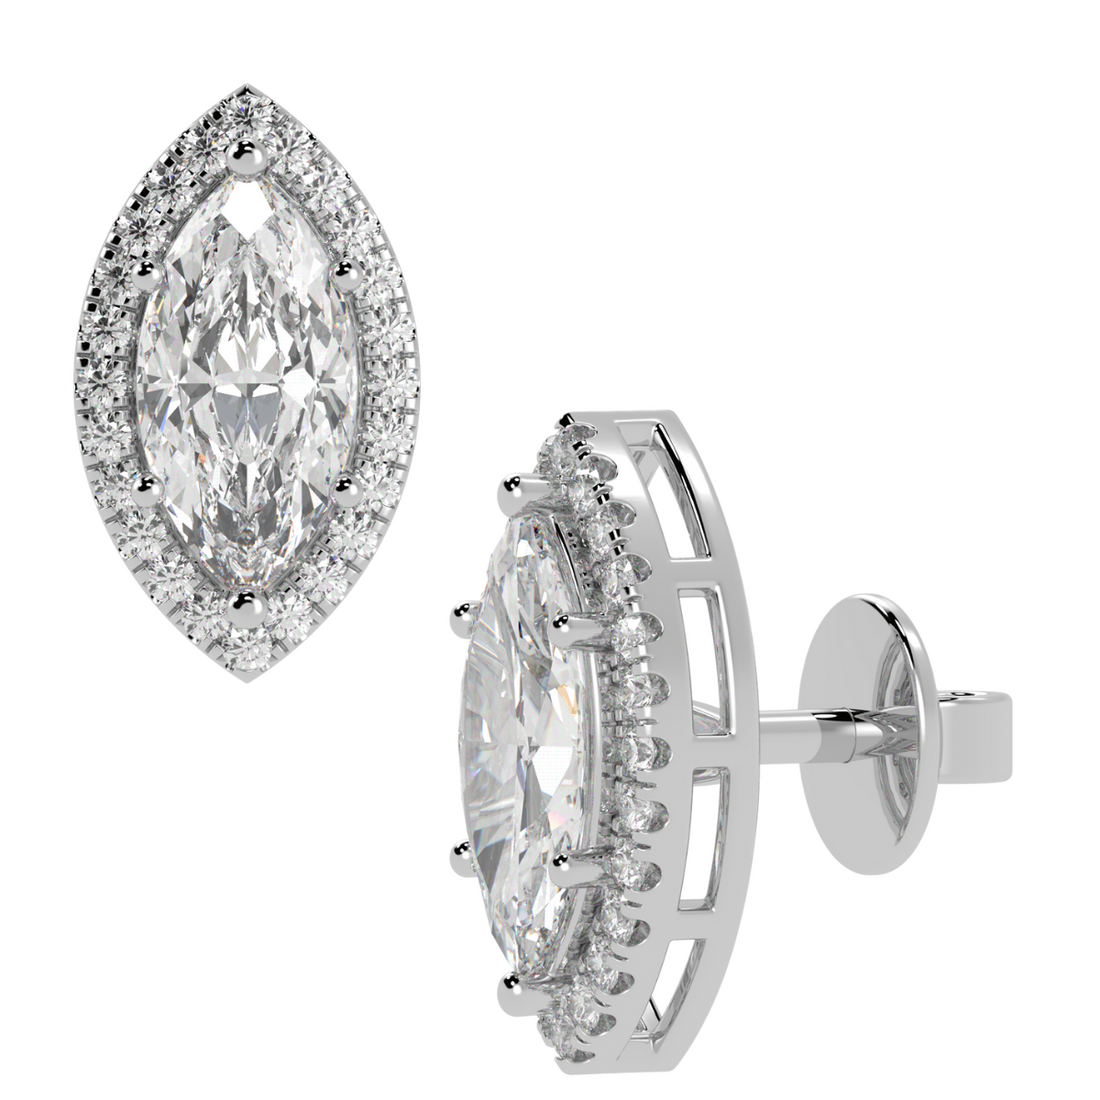 Halo Marquise Solitaire Stud Earrings